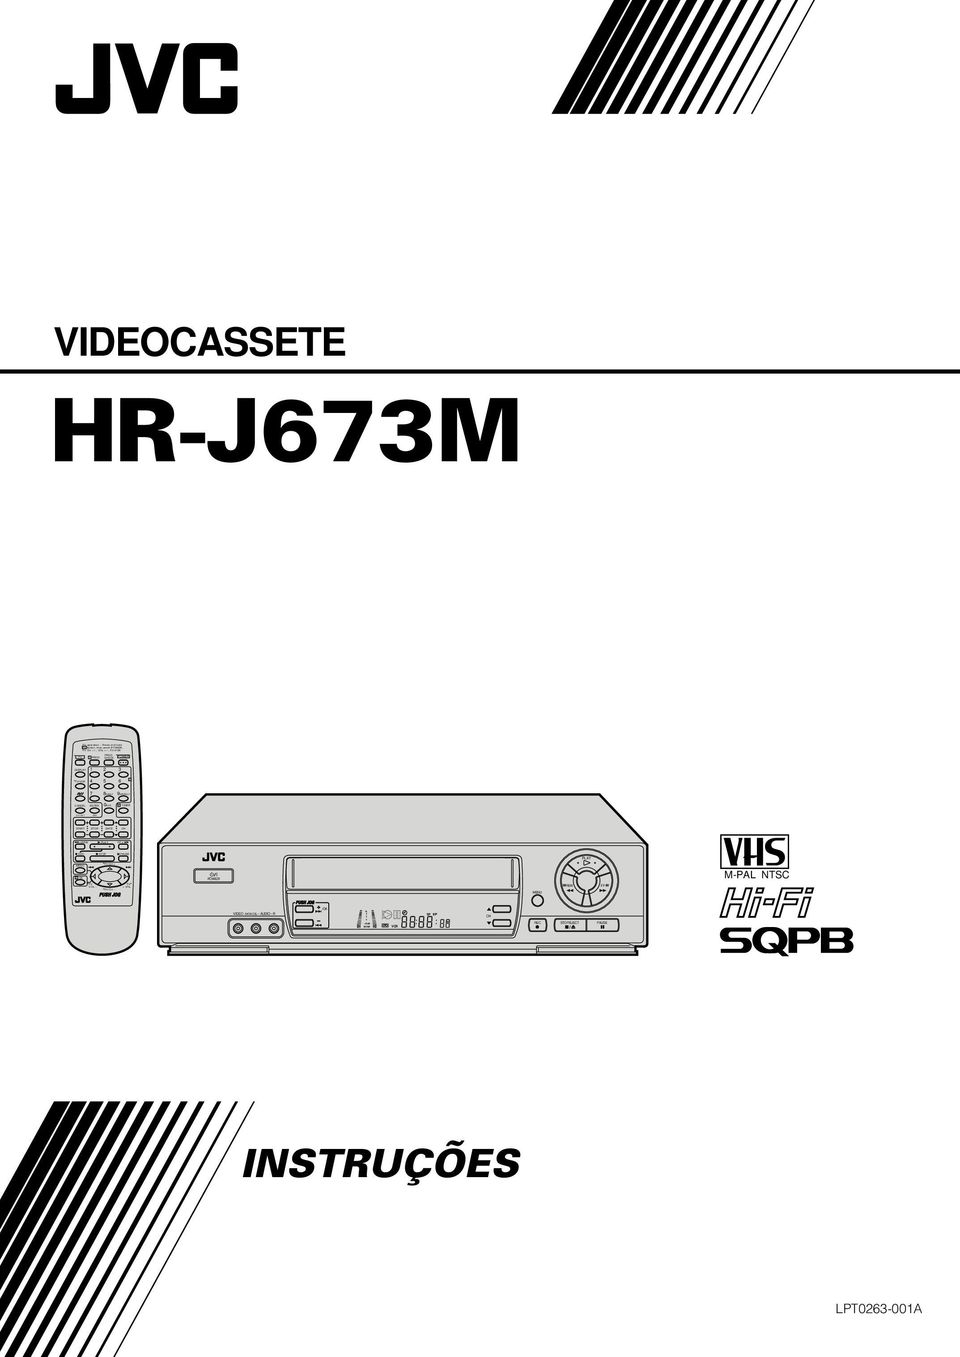 VIDEOCASSETE HR-J7M TV operation Press and hold TV button, then press POWER, PROG.